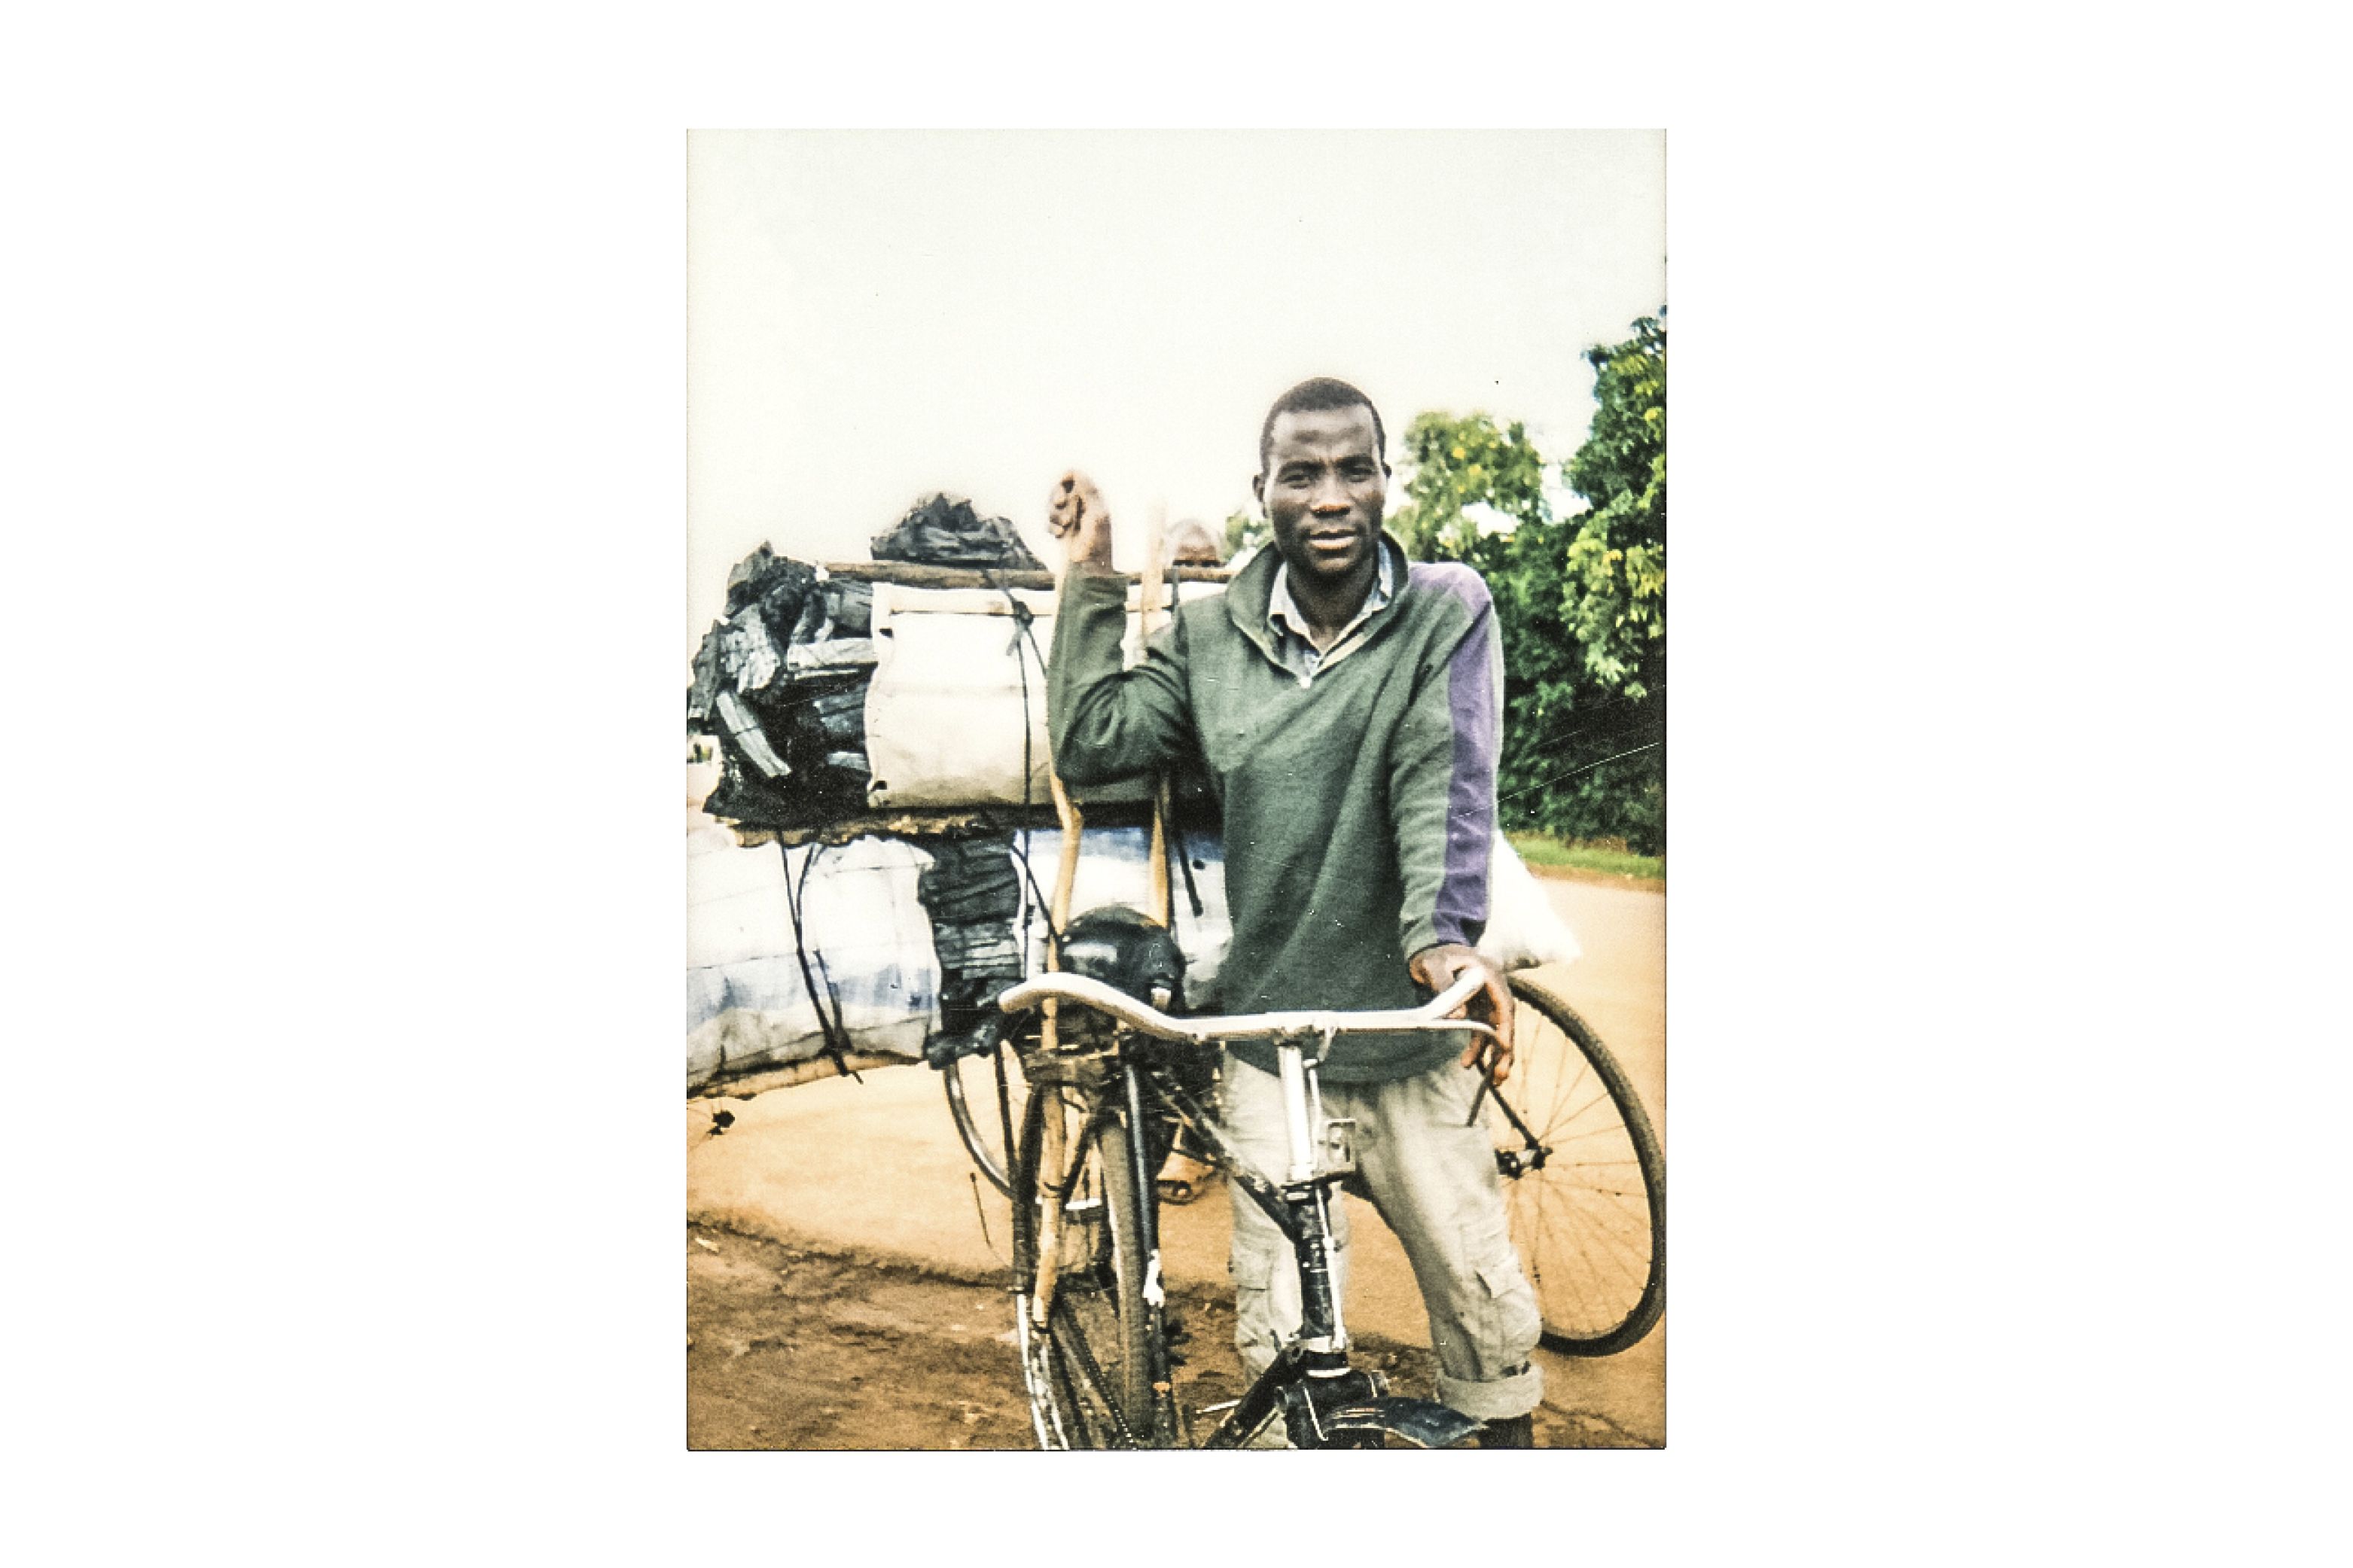 Handle Marino cycles around twelve hours from his village to Lilongwe and back to take up to 150 kilograms of charcoal to the city. Image by Nathalie Bertrams. Malawi, 2017.